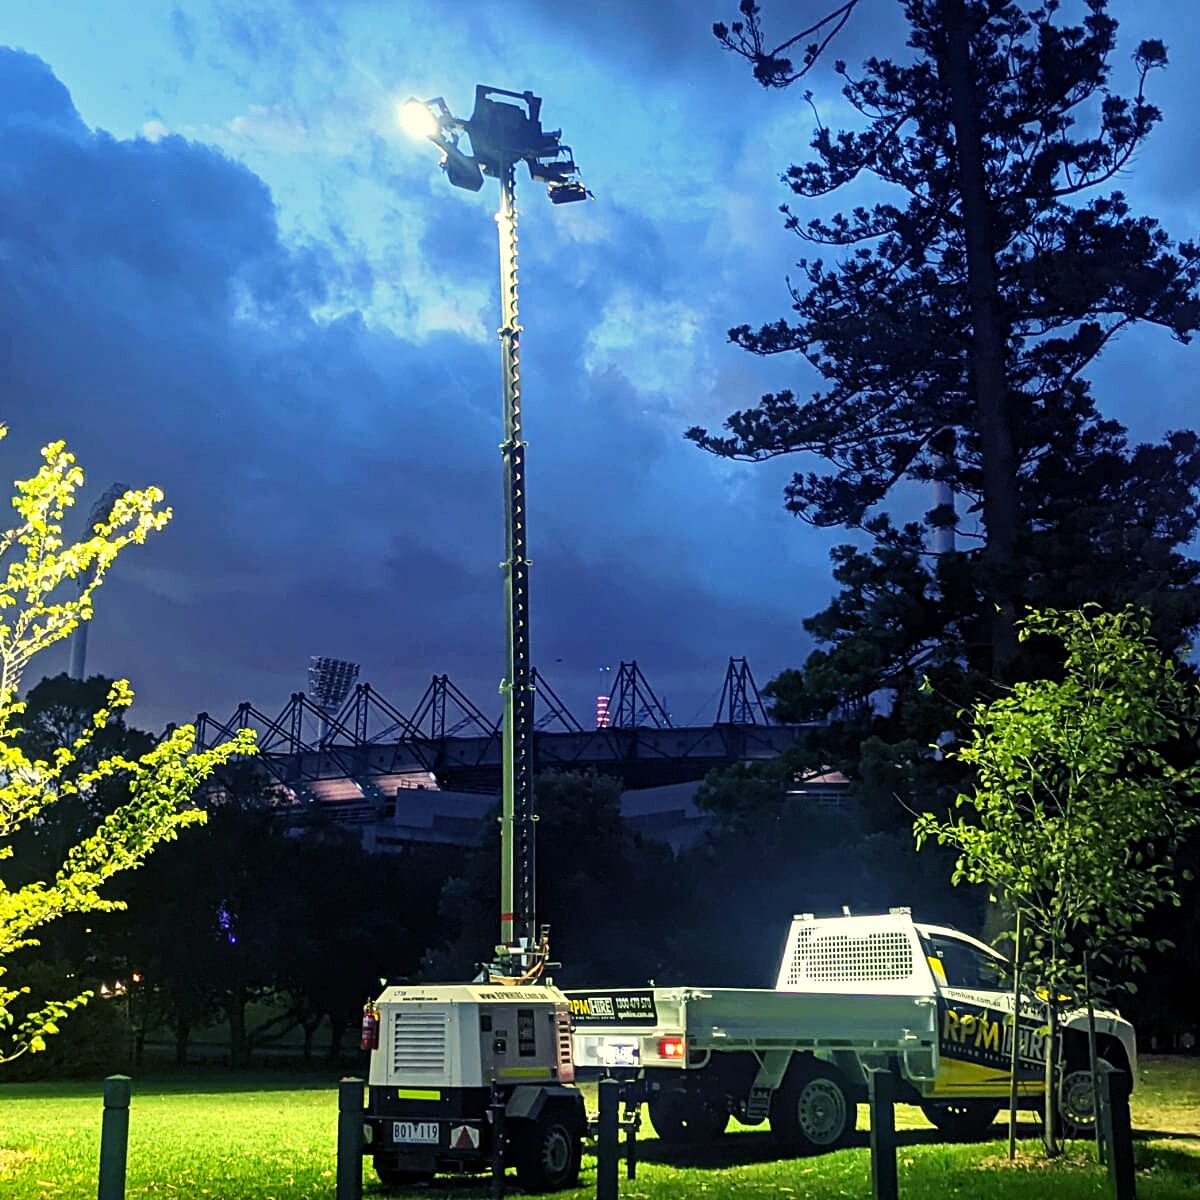 Portable Mobile Light Towers Hire in Sydney Brisbane | Hire